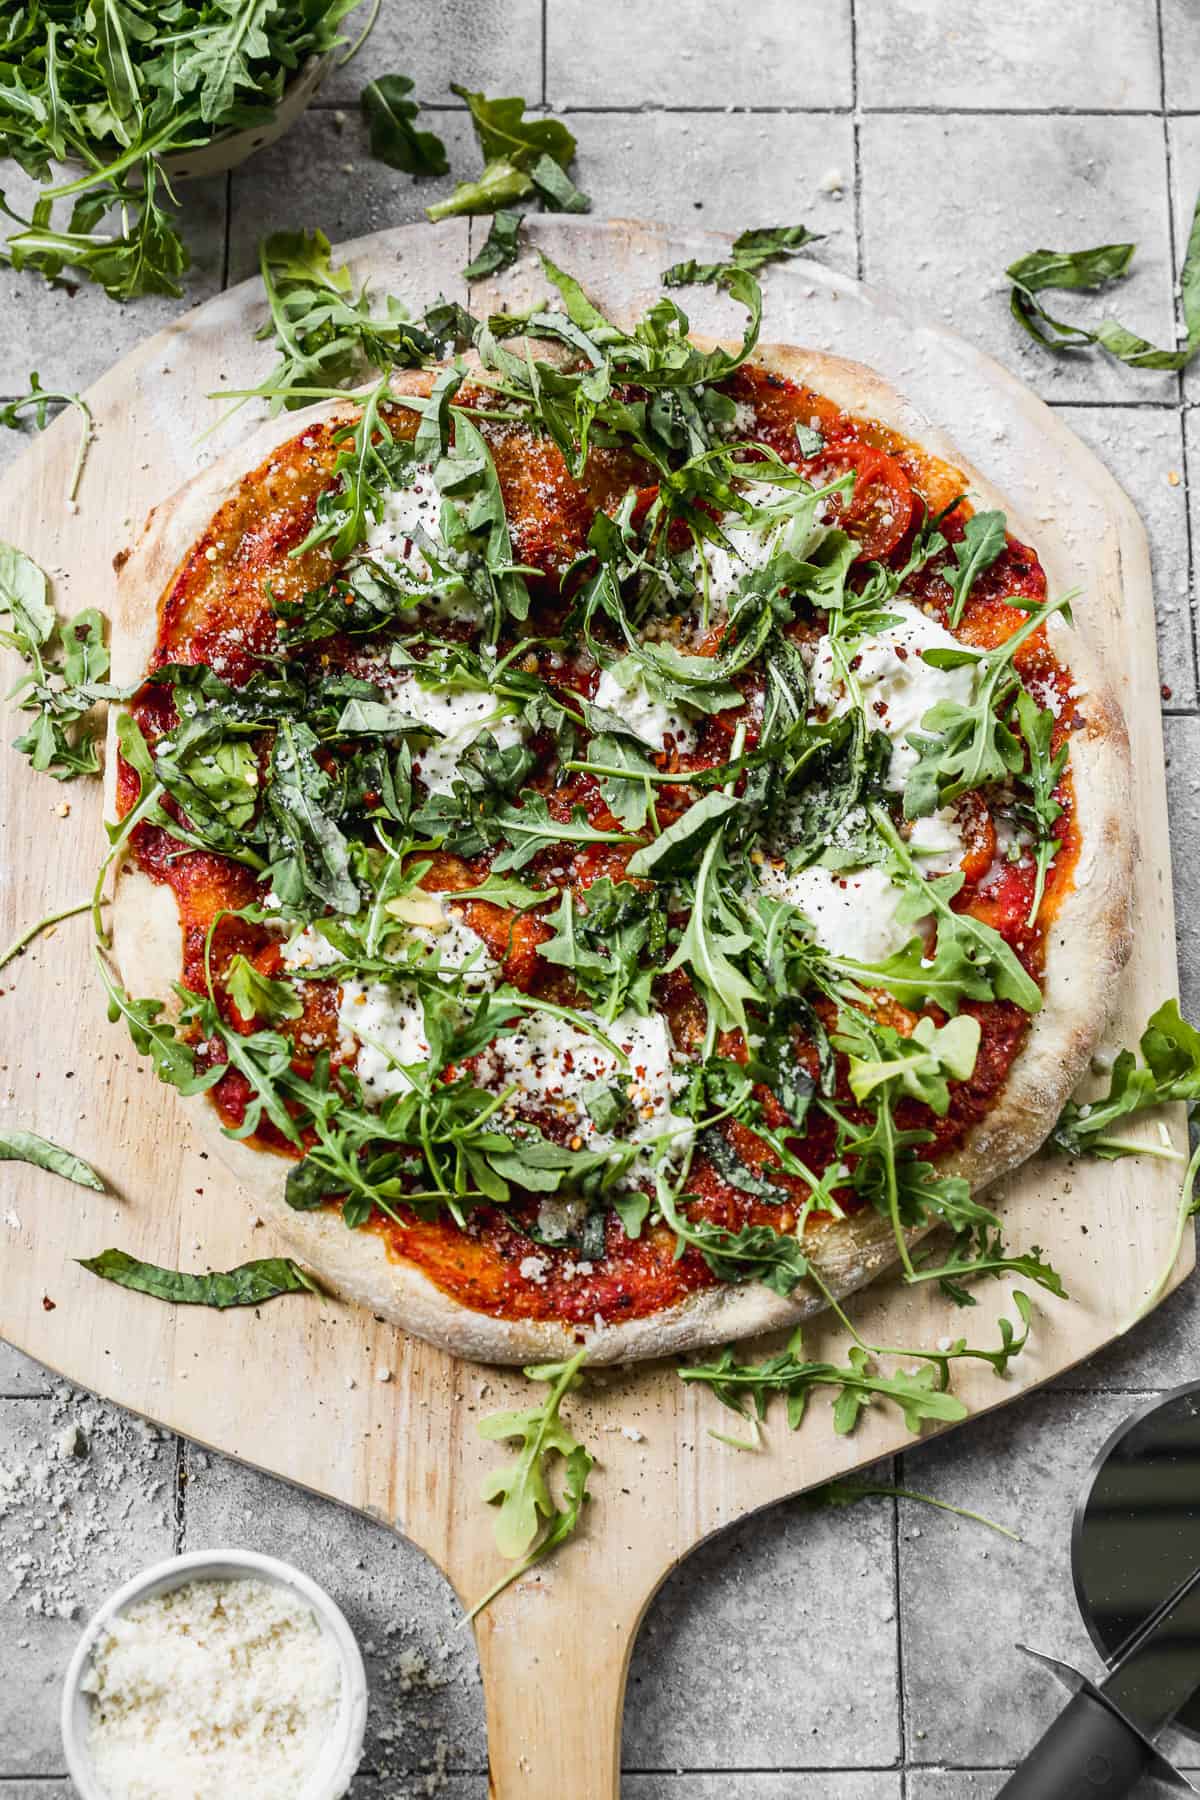 A Burrata Pizza covered in fresh arugula and a drizzle of a balsamic reduction on a wooden pizza peel.